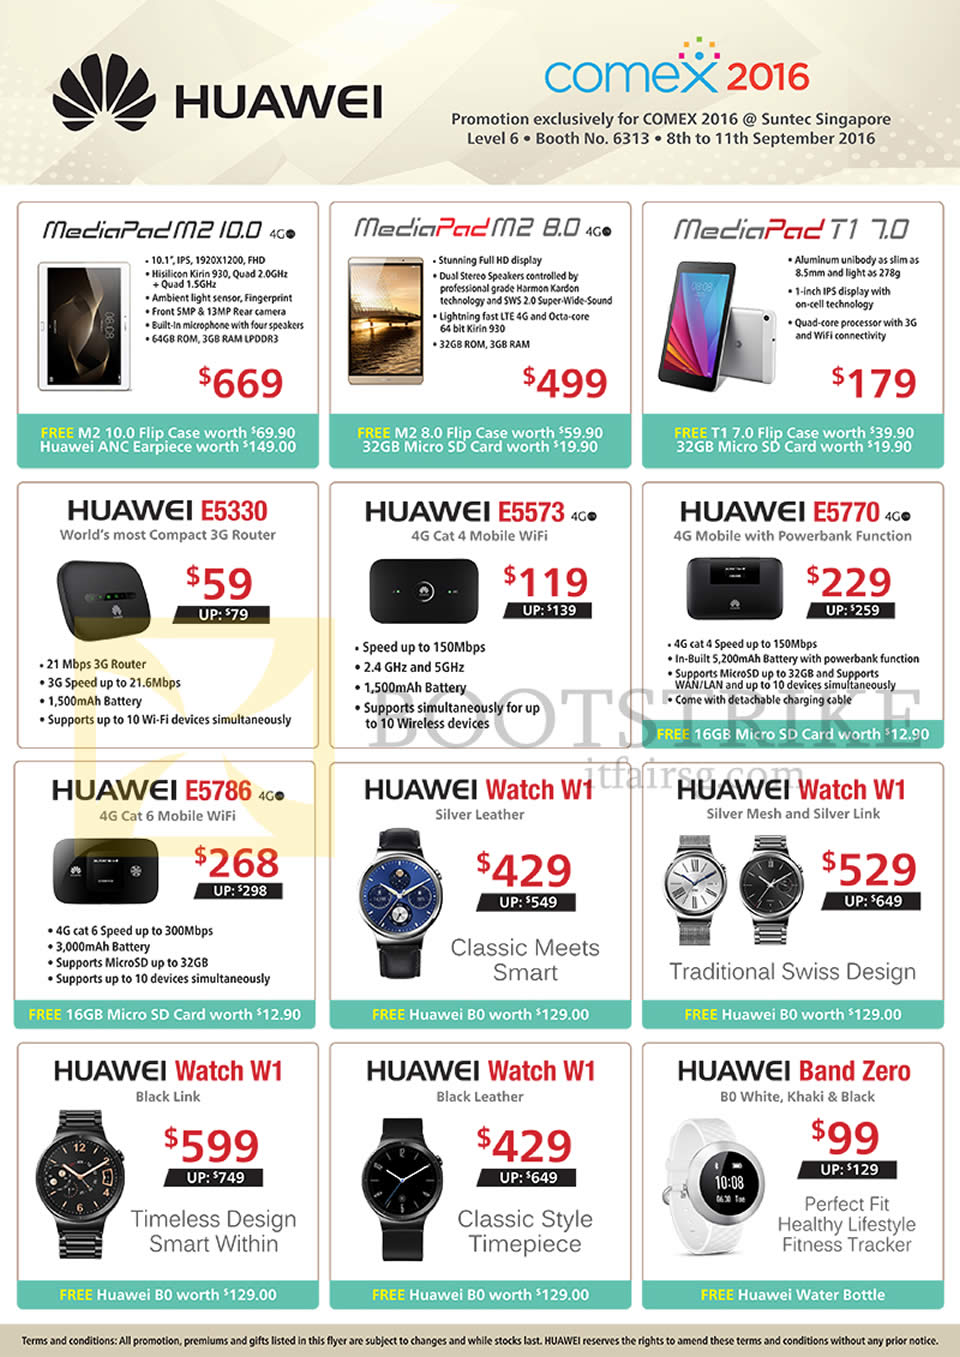 COMEX 2016 price list image brochure of Convergent Huawei Tablets, Router, Powerbank, Watches, MediaPad M2 10.0, 8.0, T1 7.0, Mobile Wifi E5330, E5573, E5770, E5786, Watch W1, Band Zero